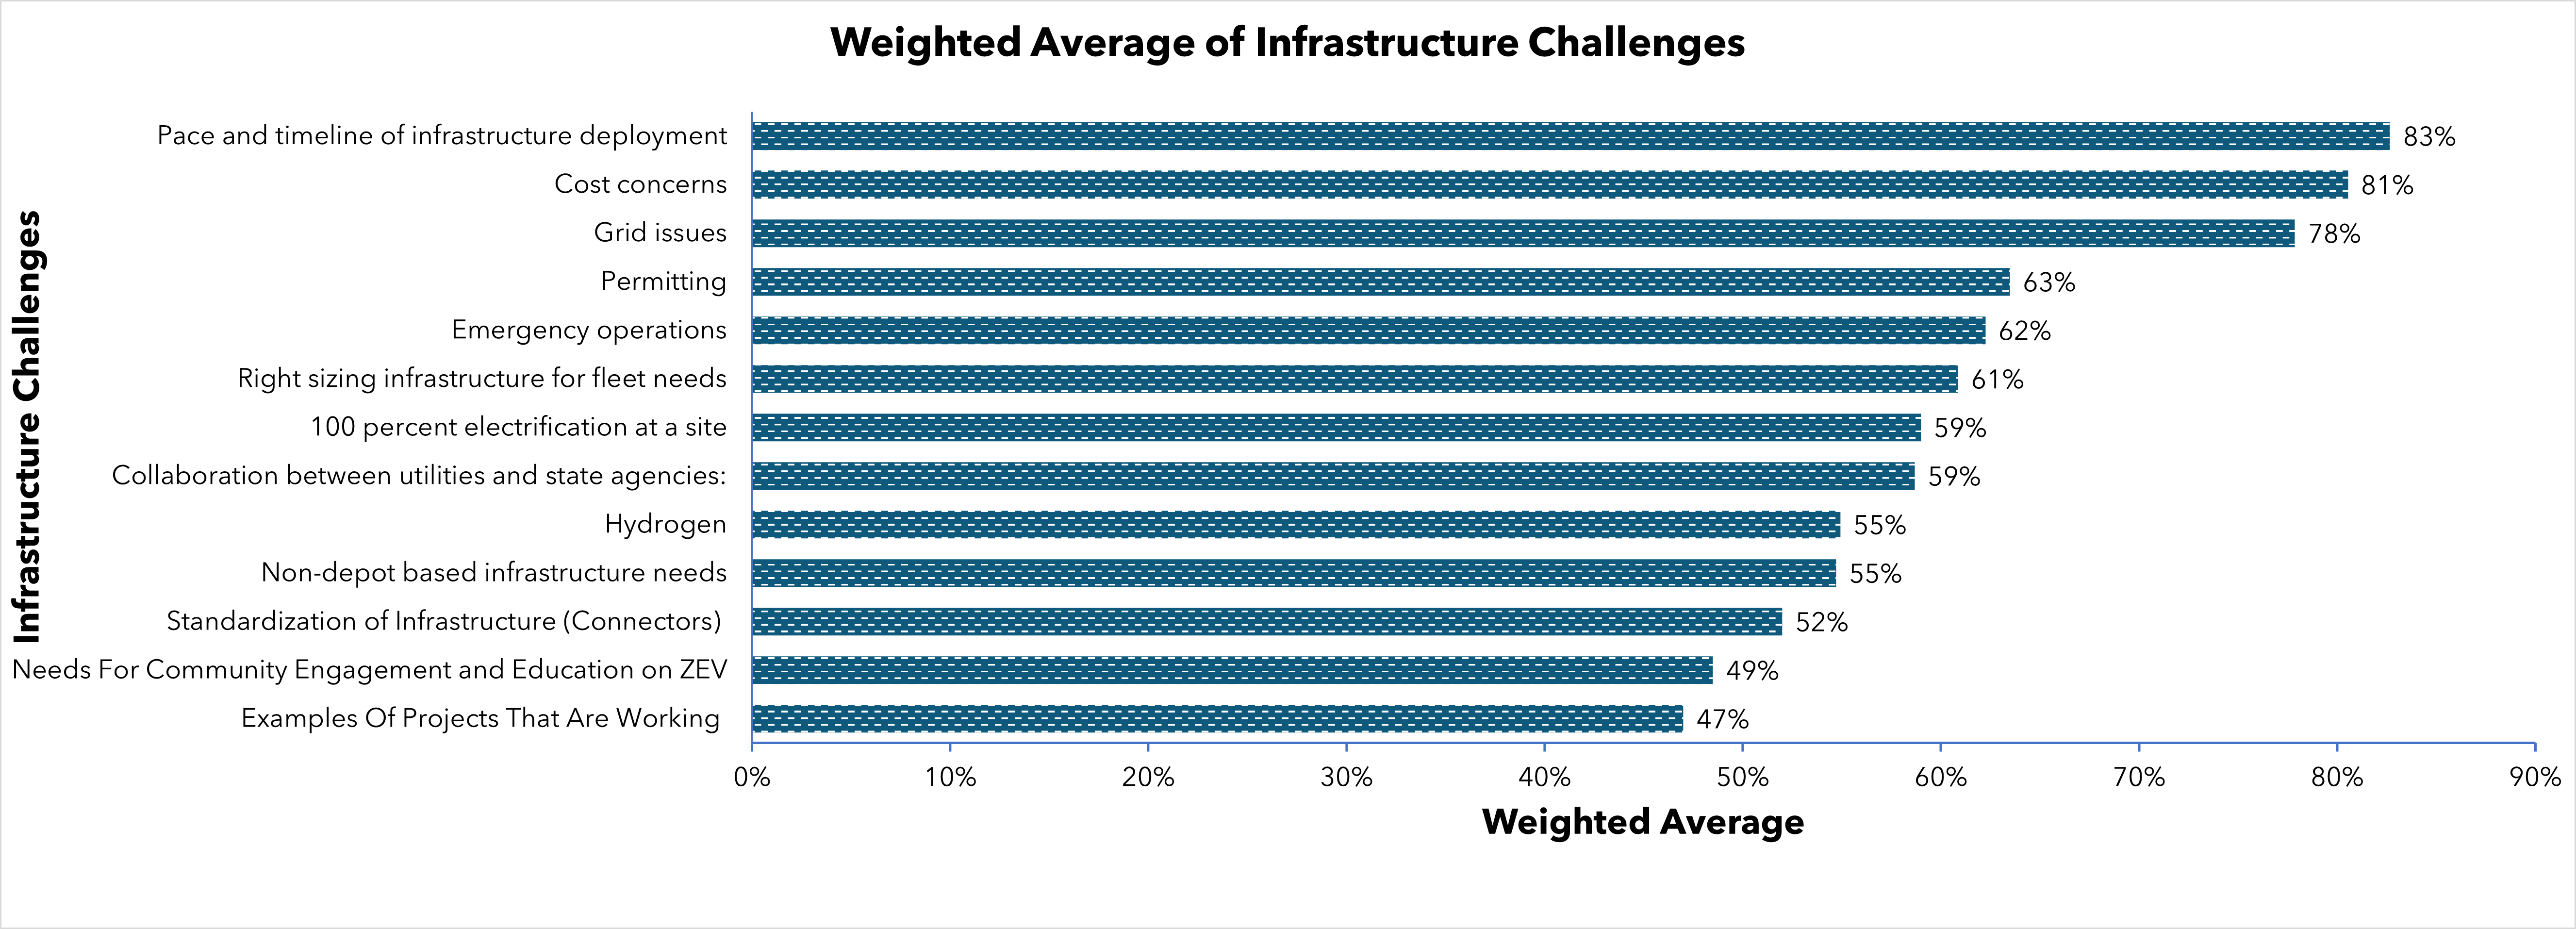 This is a chart showing weighted average results from the surveys prioritizing infrastructure challenges. Higher percentage equates to higher priority. Top priority, pace and timeline of infrastructure deployment received ranked 83 percent. Cost concerns ranked 81 percent. Grid issues ranked 78 percent. Permitting ranked 63 percent. Emergency operations ranked 62 percent. Right sizing infrastructure for fleet needs ranked 61 percent. 100 percent electrification at a site ranked 59 percent. Similarly, collaboration between utilities and state agencies ranked 59 percent. Hydrogen and non-depot based infrastructure needs both ranked 55 percent. Standardization of infrastructure - connectors ranked 52 percent. Need for community engagement ranked 49 percent. And examples of projects that are working ranked 47 percent.